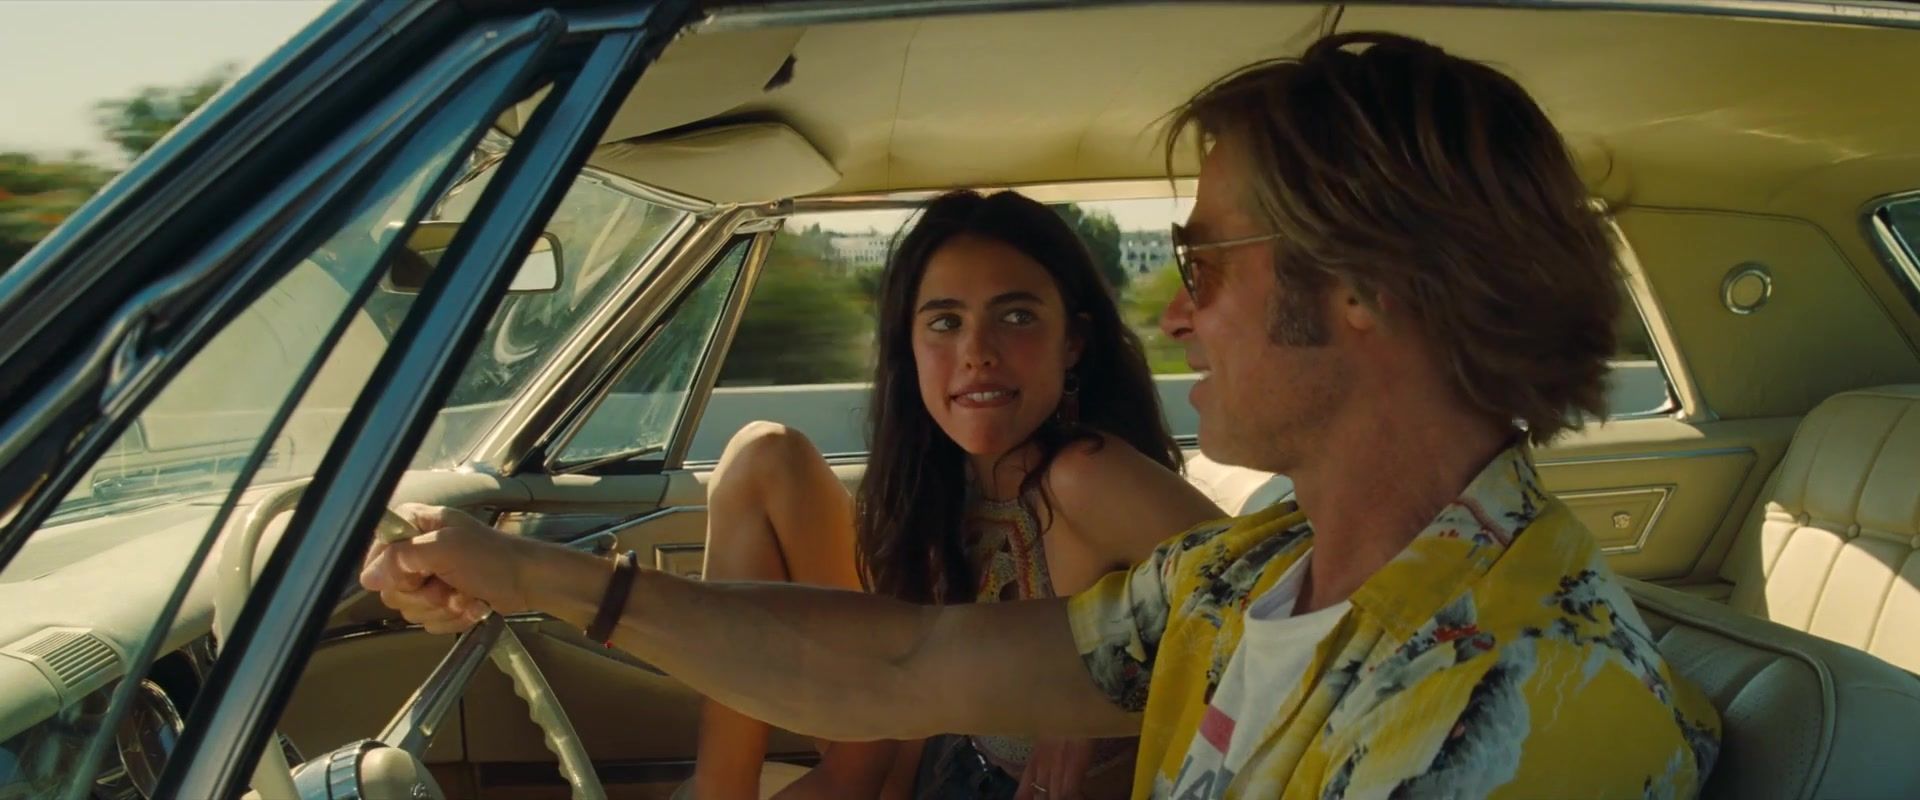 Spanish Sexy Dakota Fanning, Margaret Qualley naked- Once Upon A Time In Hollywood (2019) PerezHilton